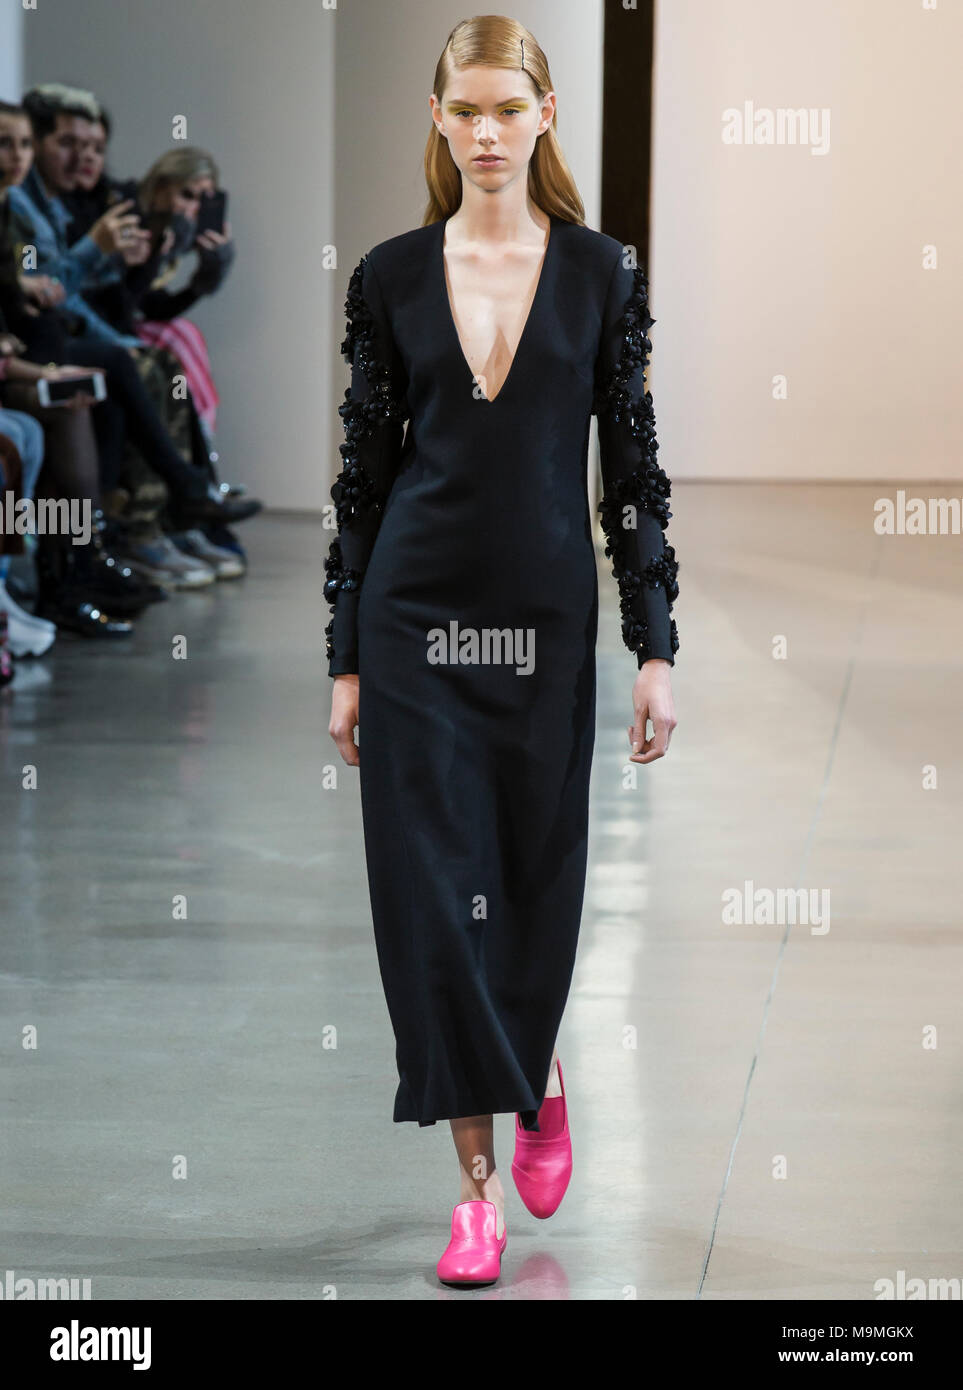 NEW YORK, NY - February 08, 2018: Lululeika Ravn Liep walks the runway at  the Noon by Noor Fall Winter 2018 fashion show during New York Fashion Week  Stock Photo - Alamy